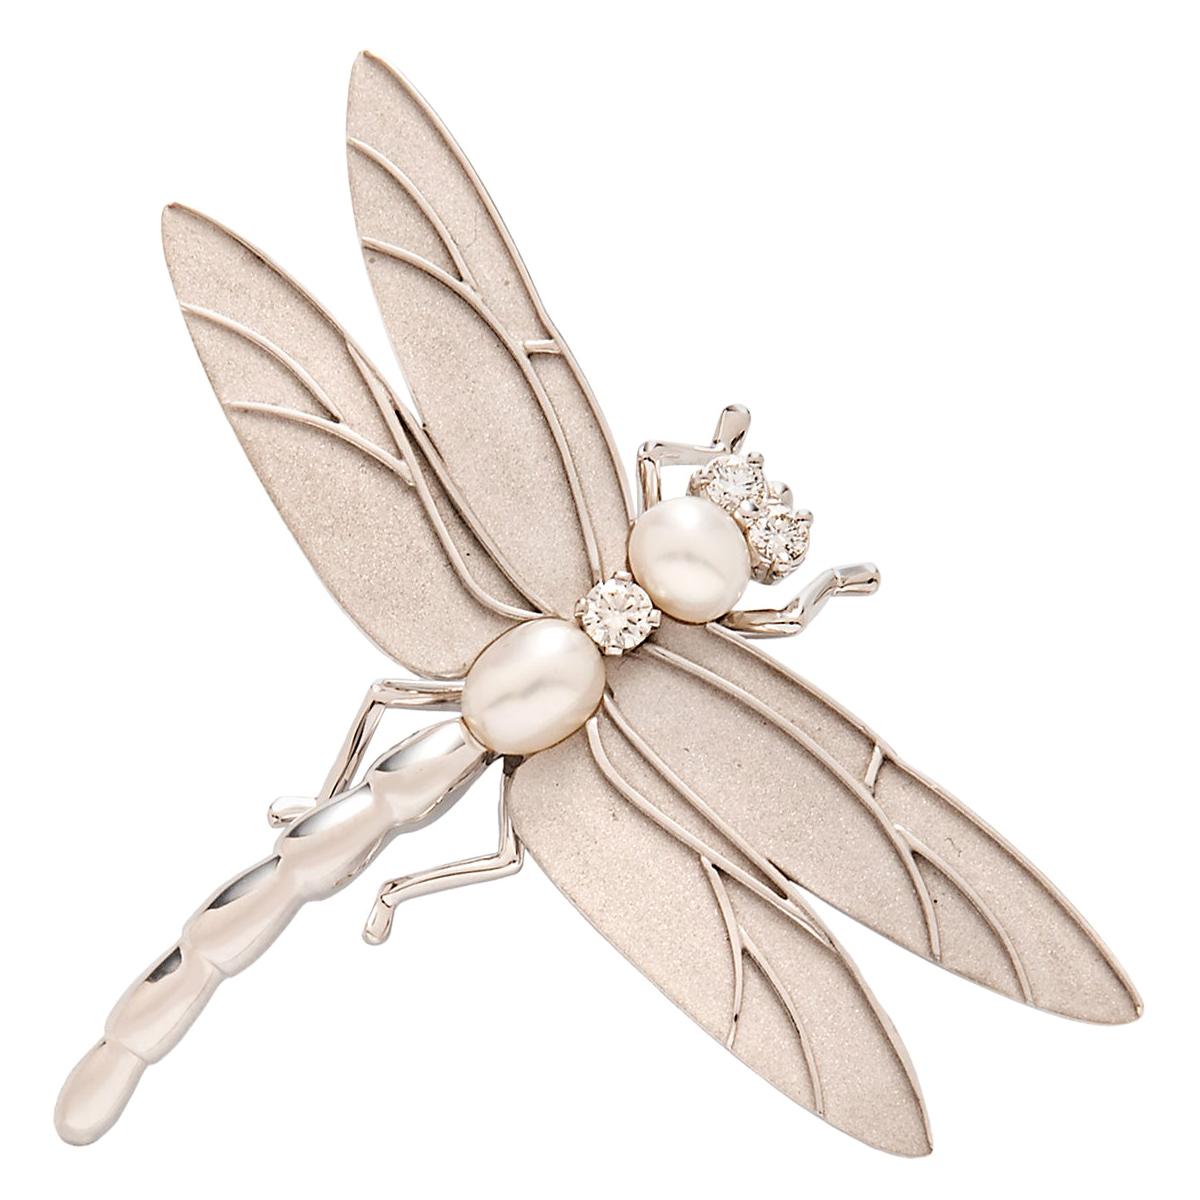 Tiffany & Co. 18 Karat White Gold, Diamond and Cultured Pearl Dragonfly Brooch